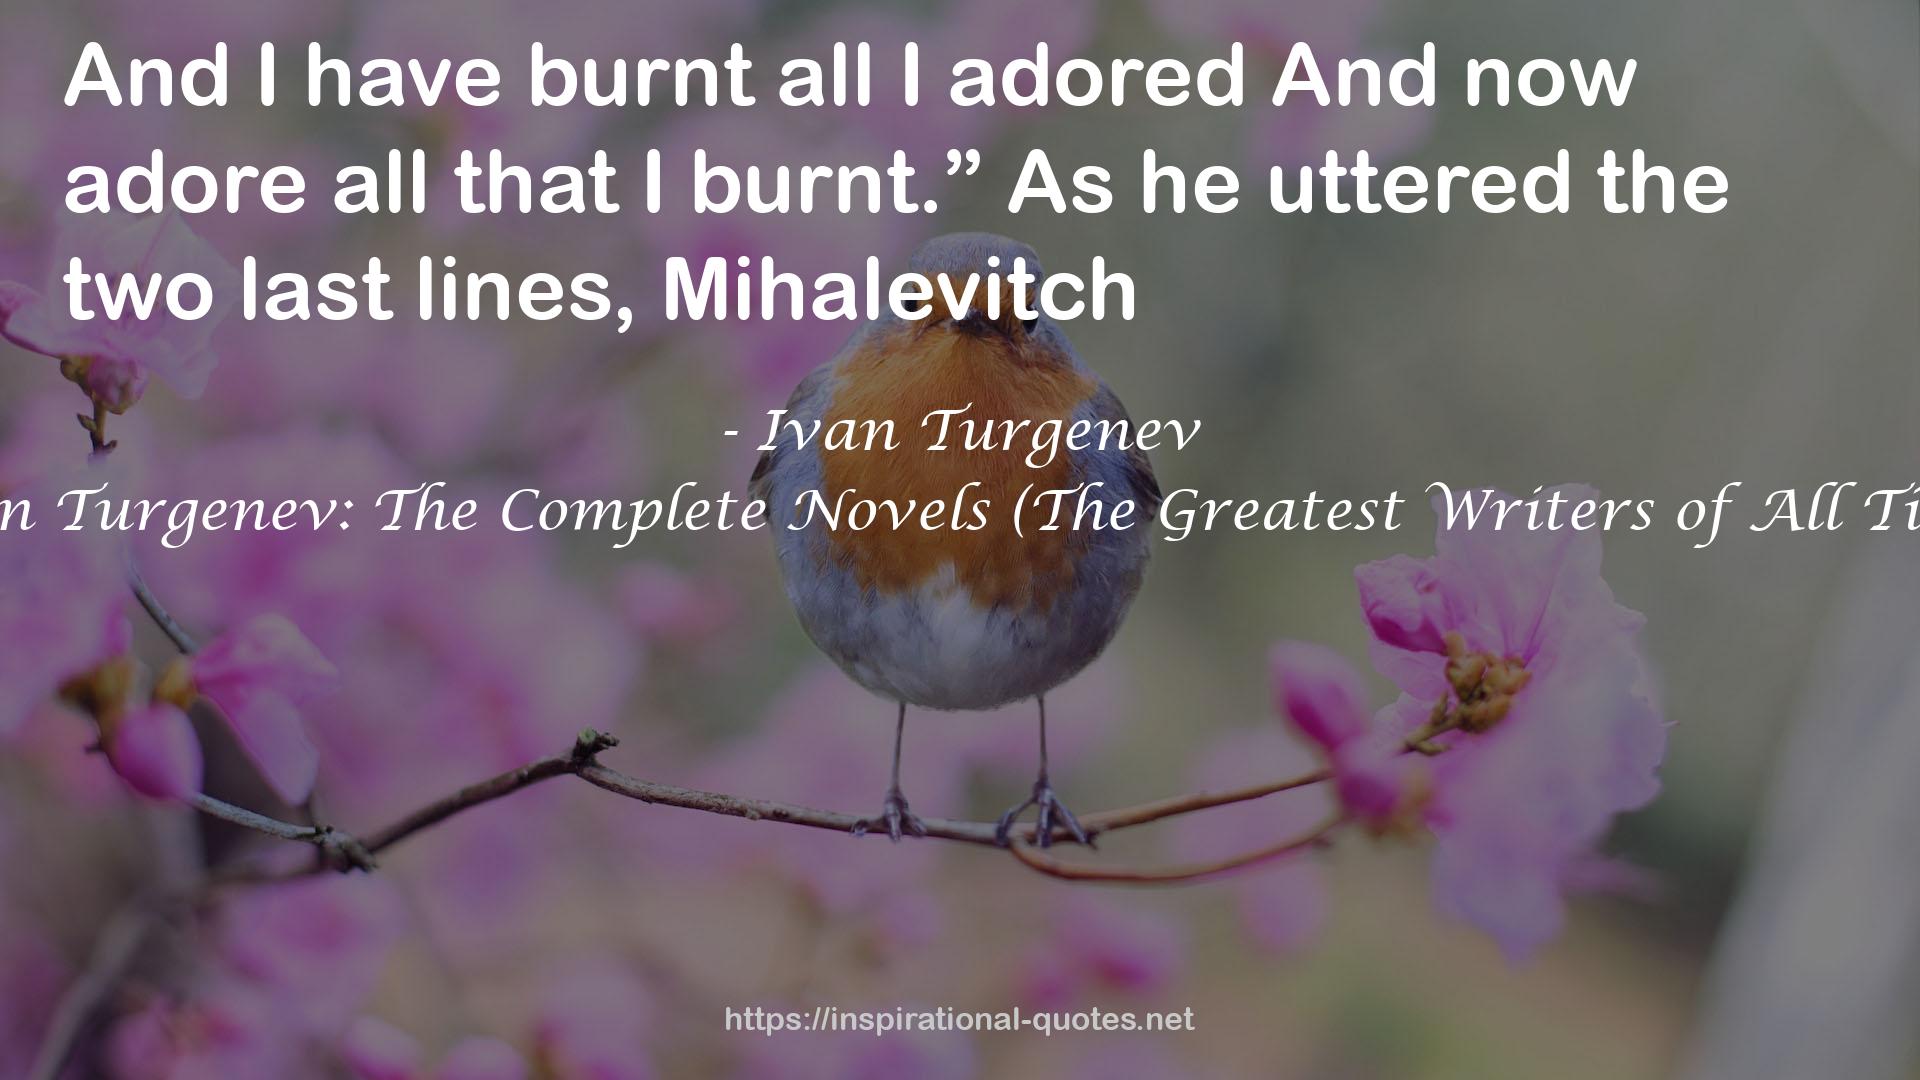 Ivan Turgenev: The Complete Novels (The Greatest Writers of All Time) QUOTES